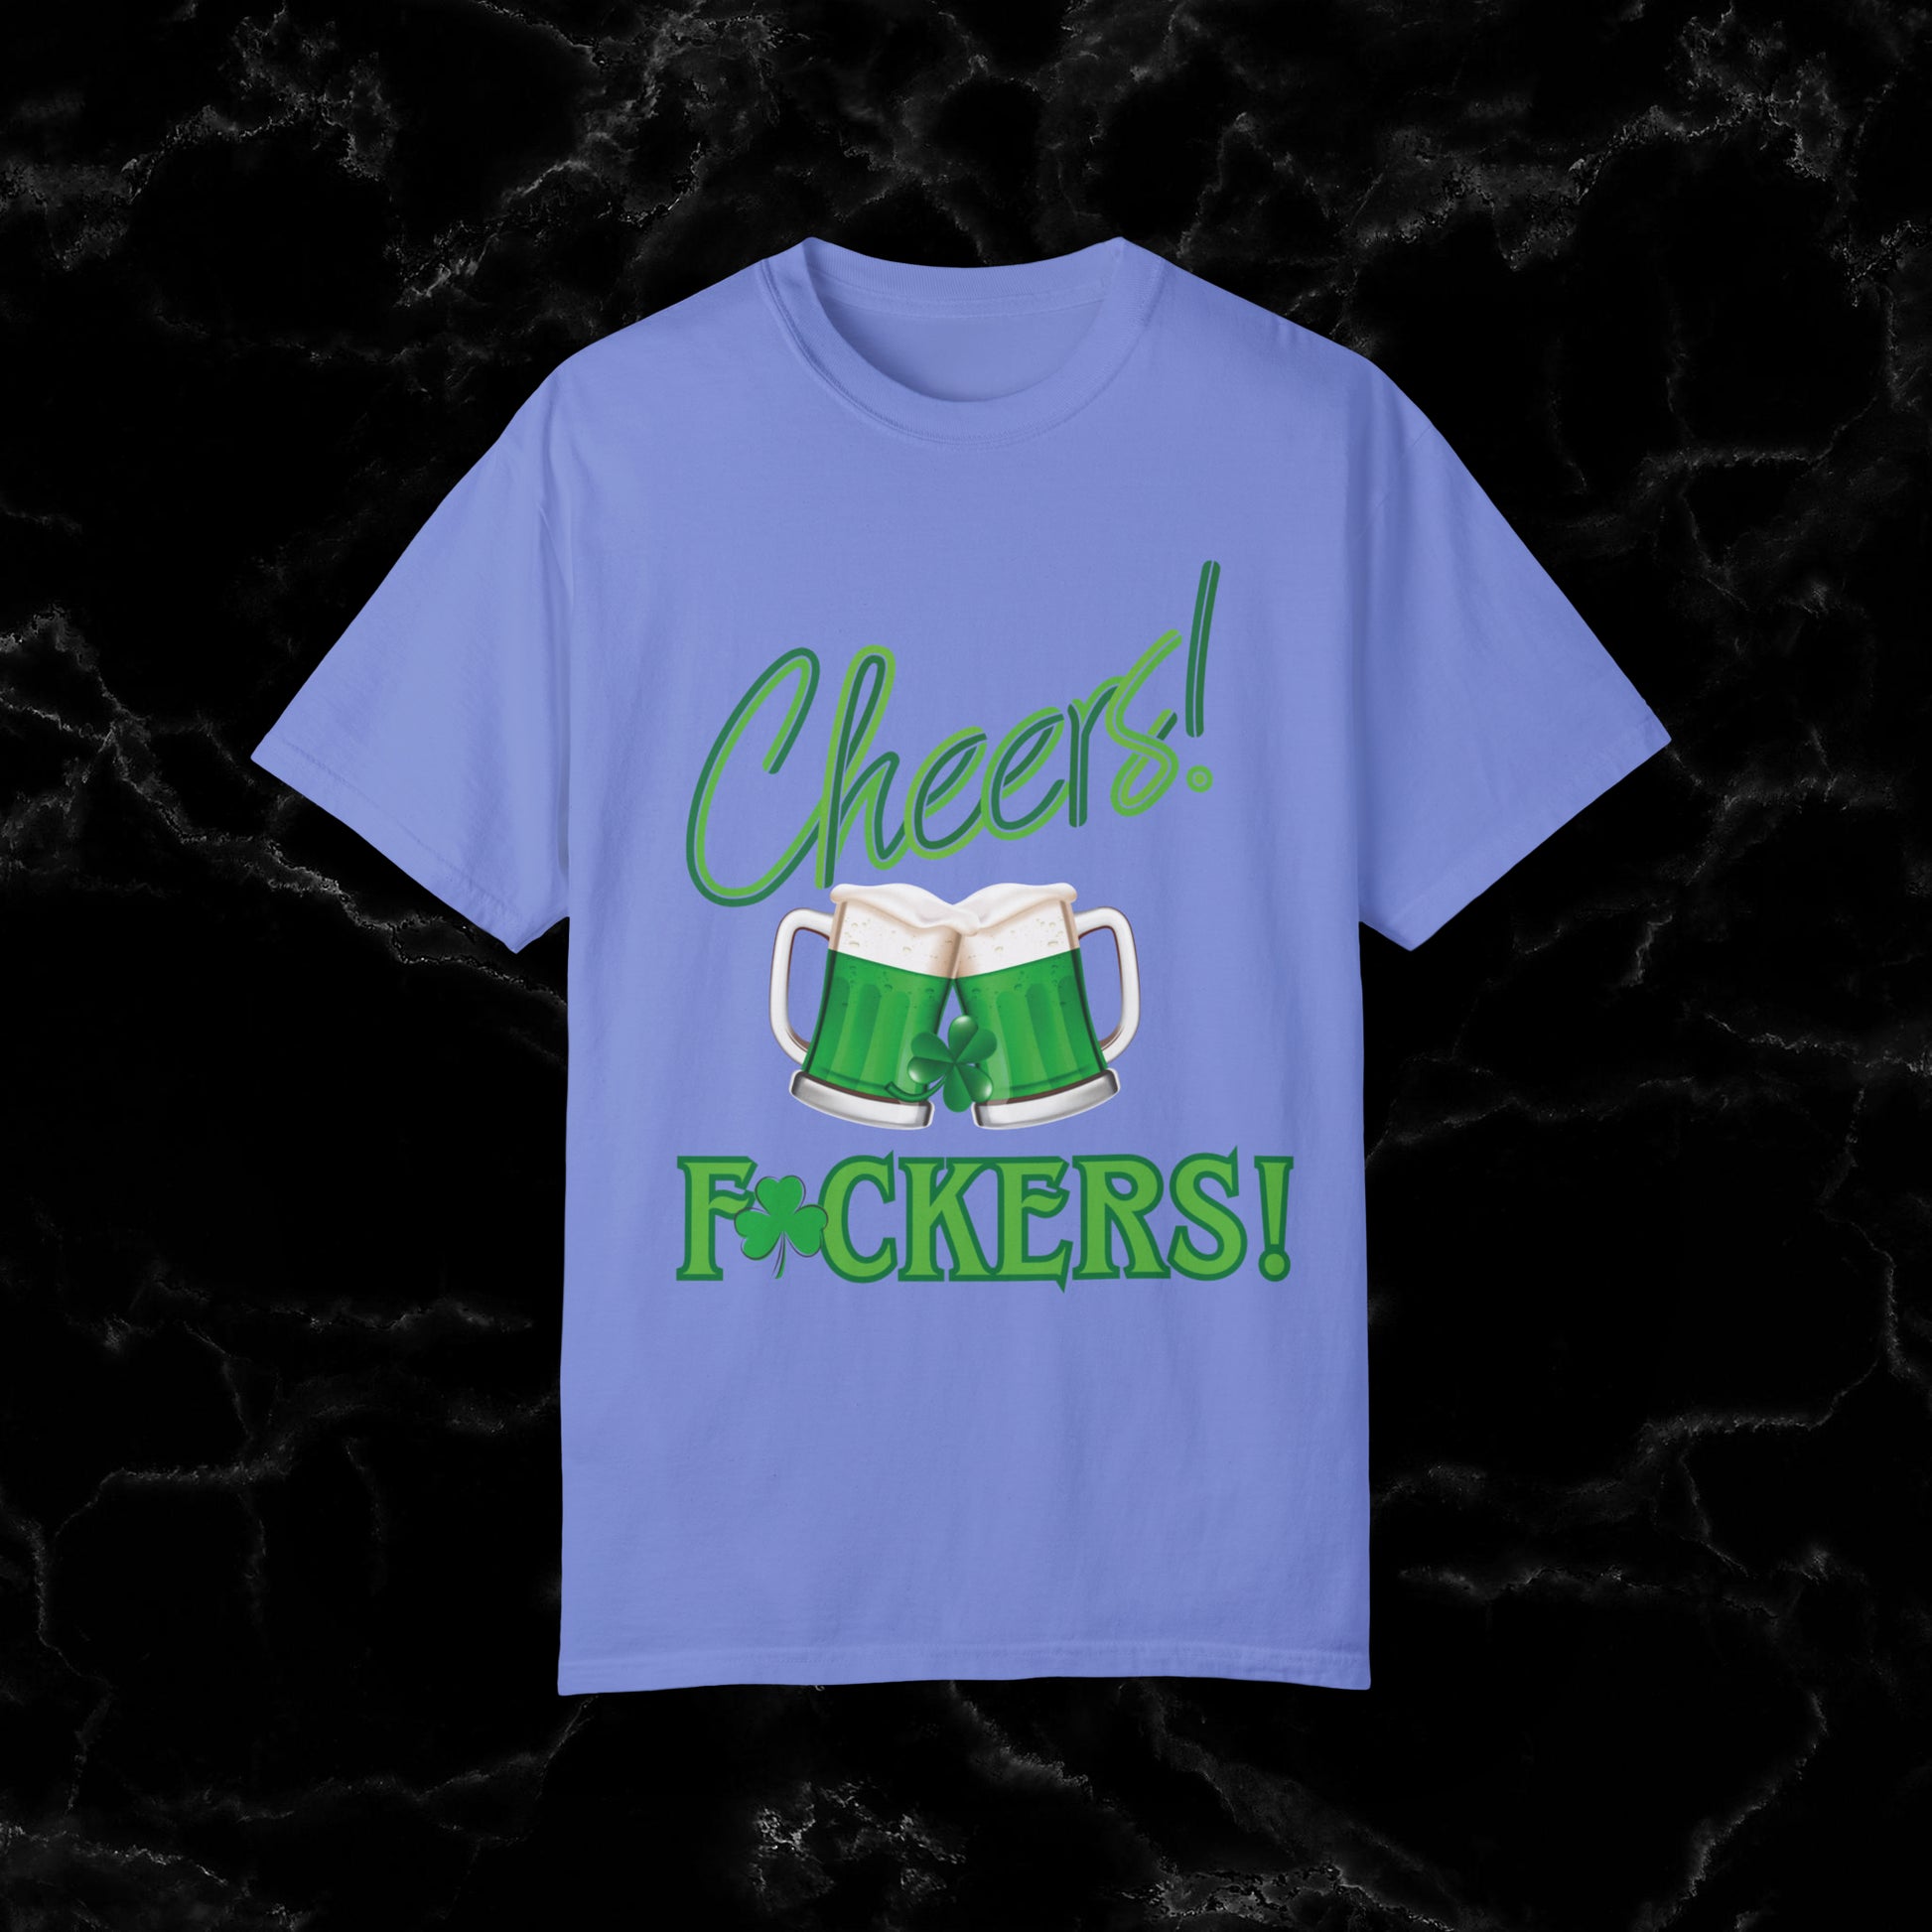 Cheers F**kers Shirt - A Bold Shamrock Statement for Irish Spirits and Good Times T-Shirt Flo Blue S 